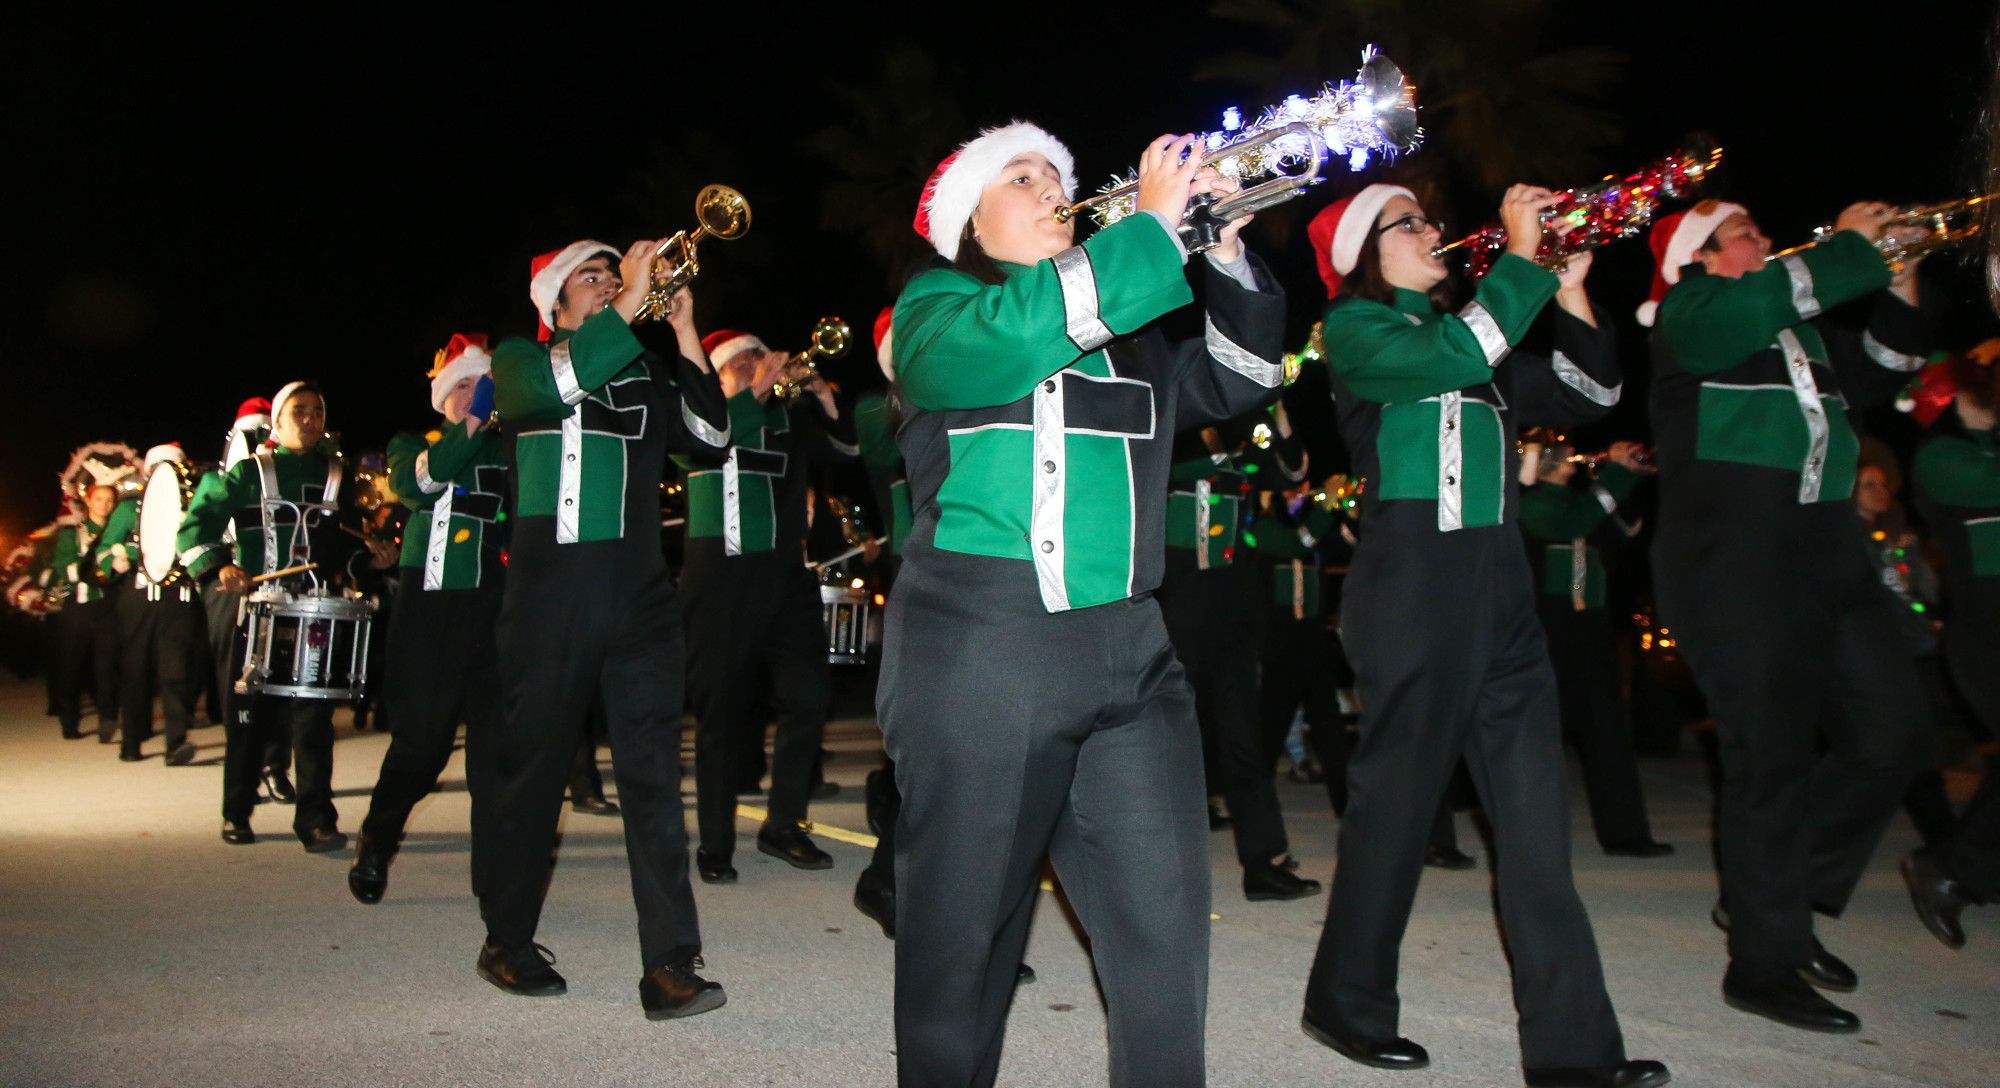 The Flagler Palm Coast High School Marching Band livens the crowd. Photo by Paige Wilson